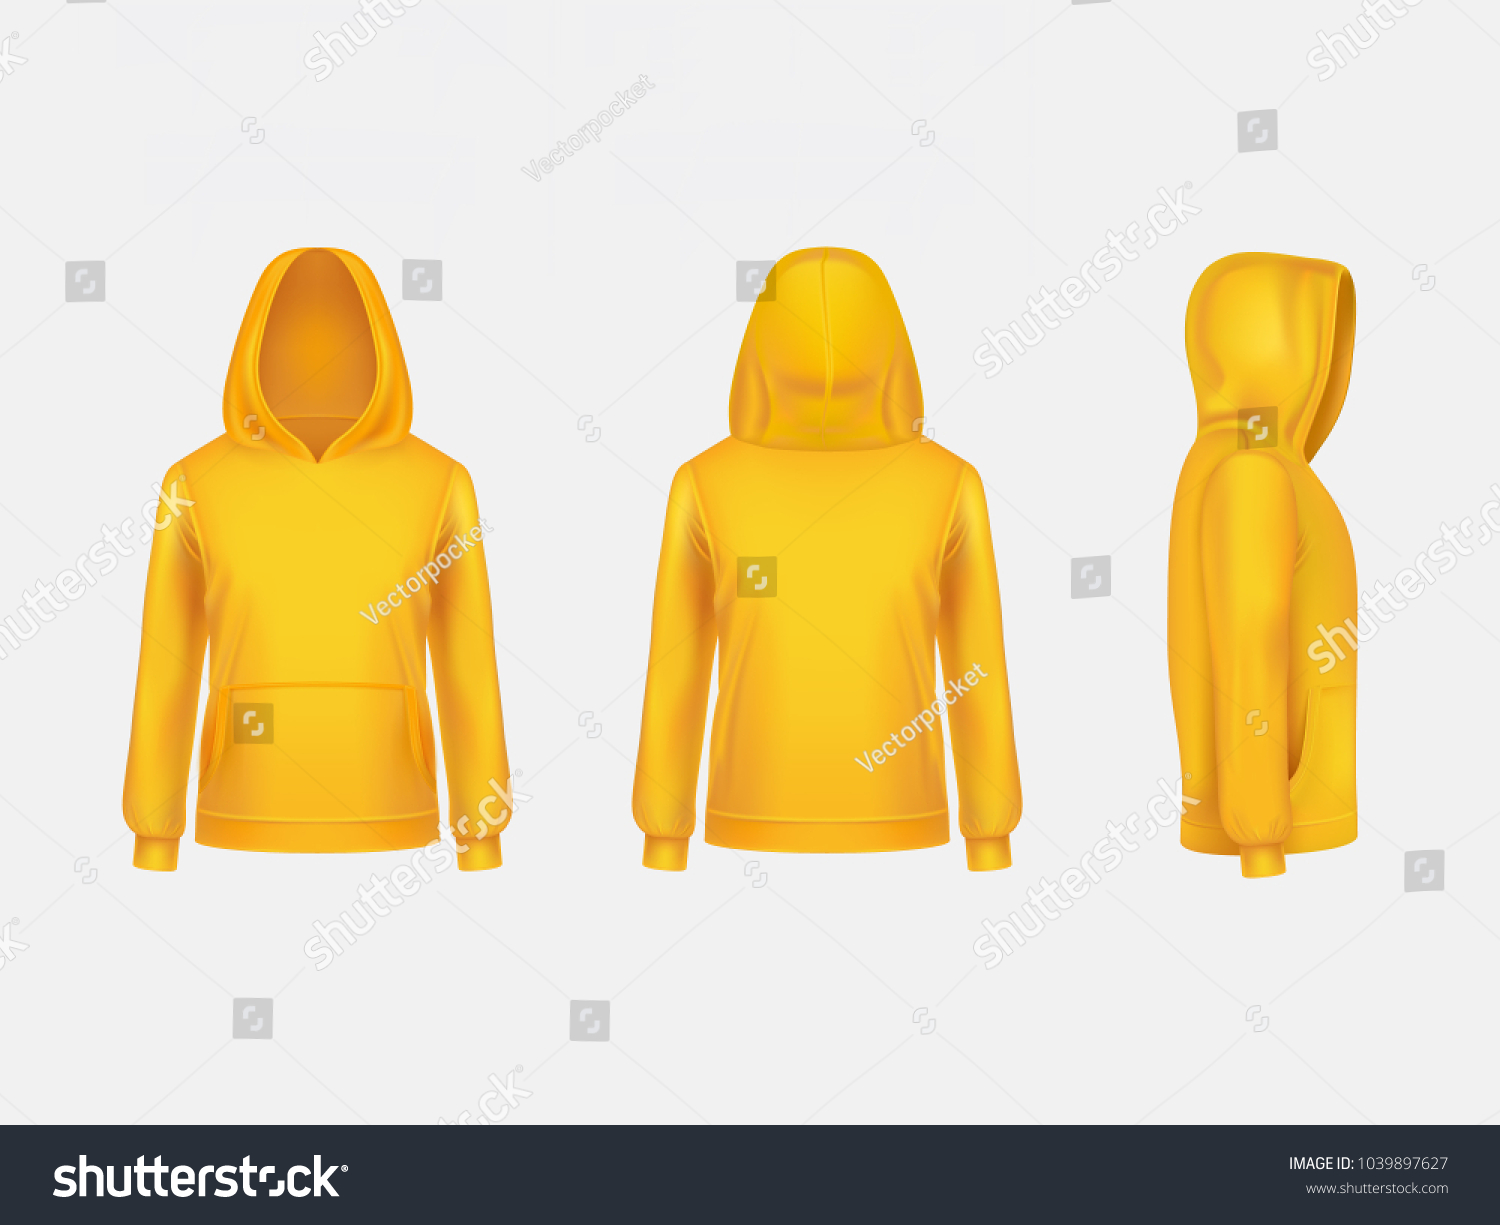 SVG of Vector yellow hoodie sweatshirt 3d realistic mockup template on white background. Fashion long sleeve, clothing hooded pullover front, back, side view. Unisex, women, men hoody, sportswear, outfit. svg